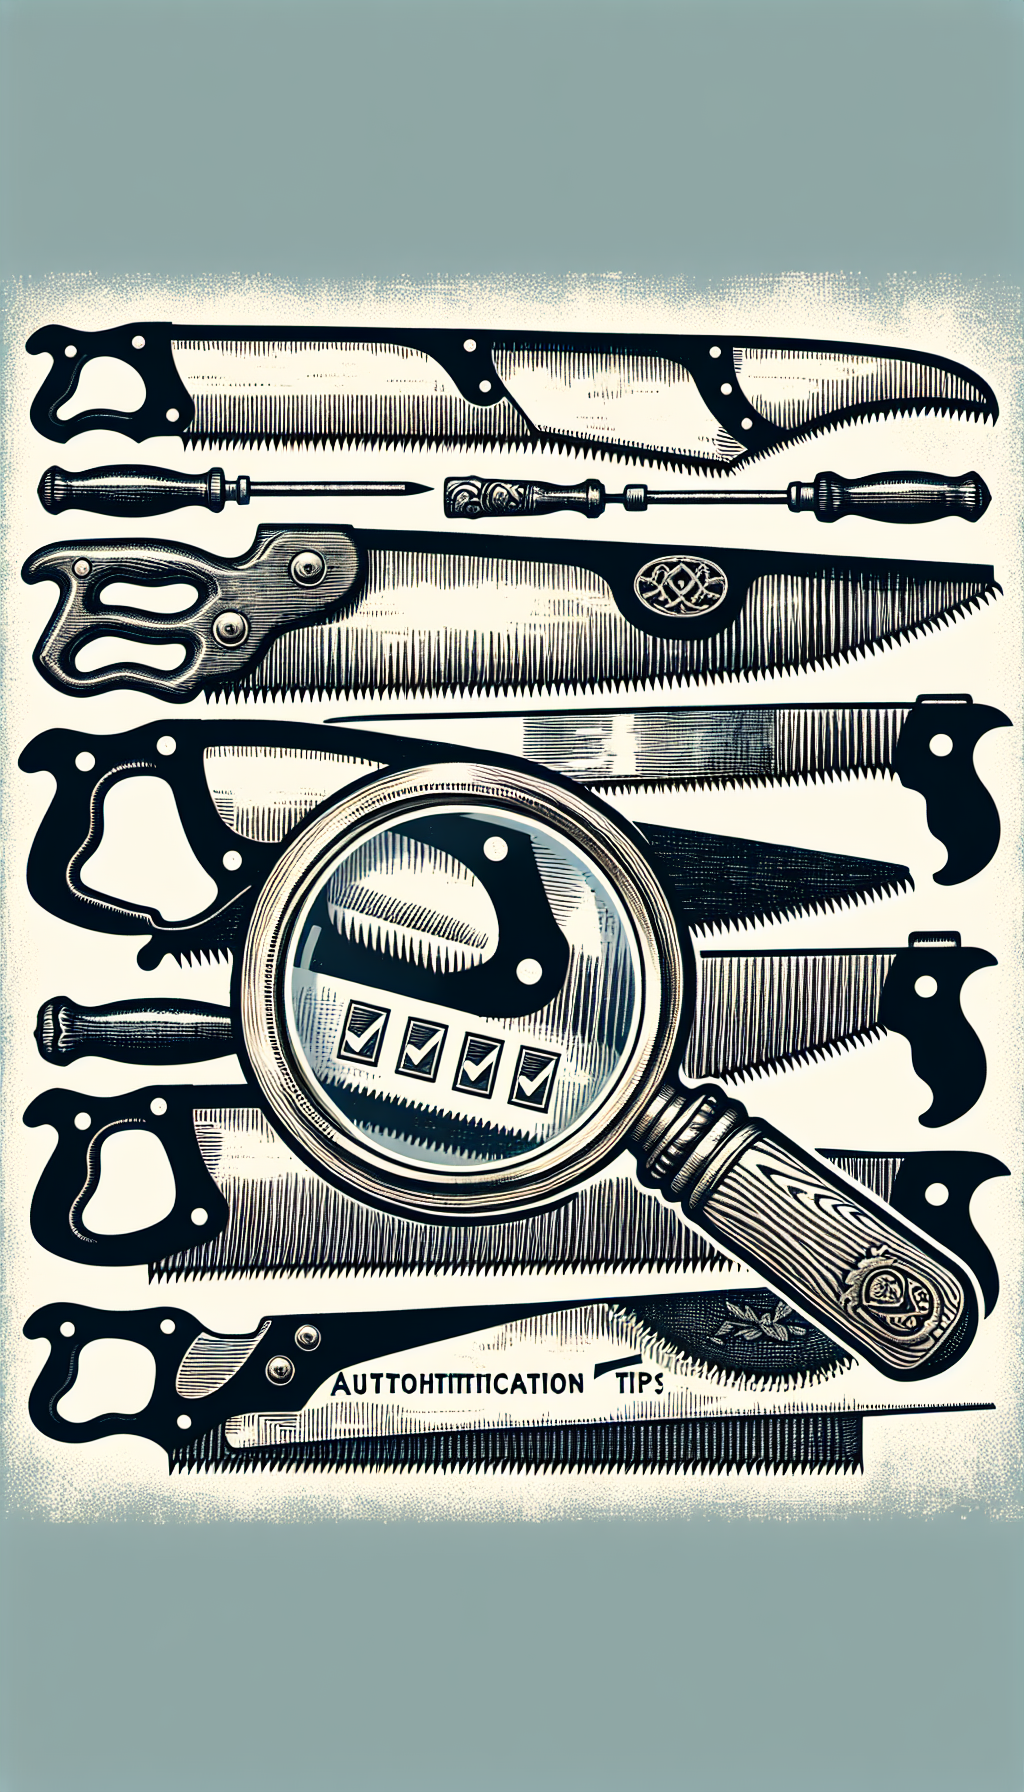 An illustration of a magnifying glass superimposed over a collage of antique hand saws, with each saw featuring a unique identifying mark (like a manufacturer's logo, distinct tooth pattern, or aged handle design). Along the magnifying glass handle, a checklist ticks off authentication tips, blending vintage etching style with crisp modern lines to symbolize the merge of antique and detective work.